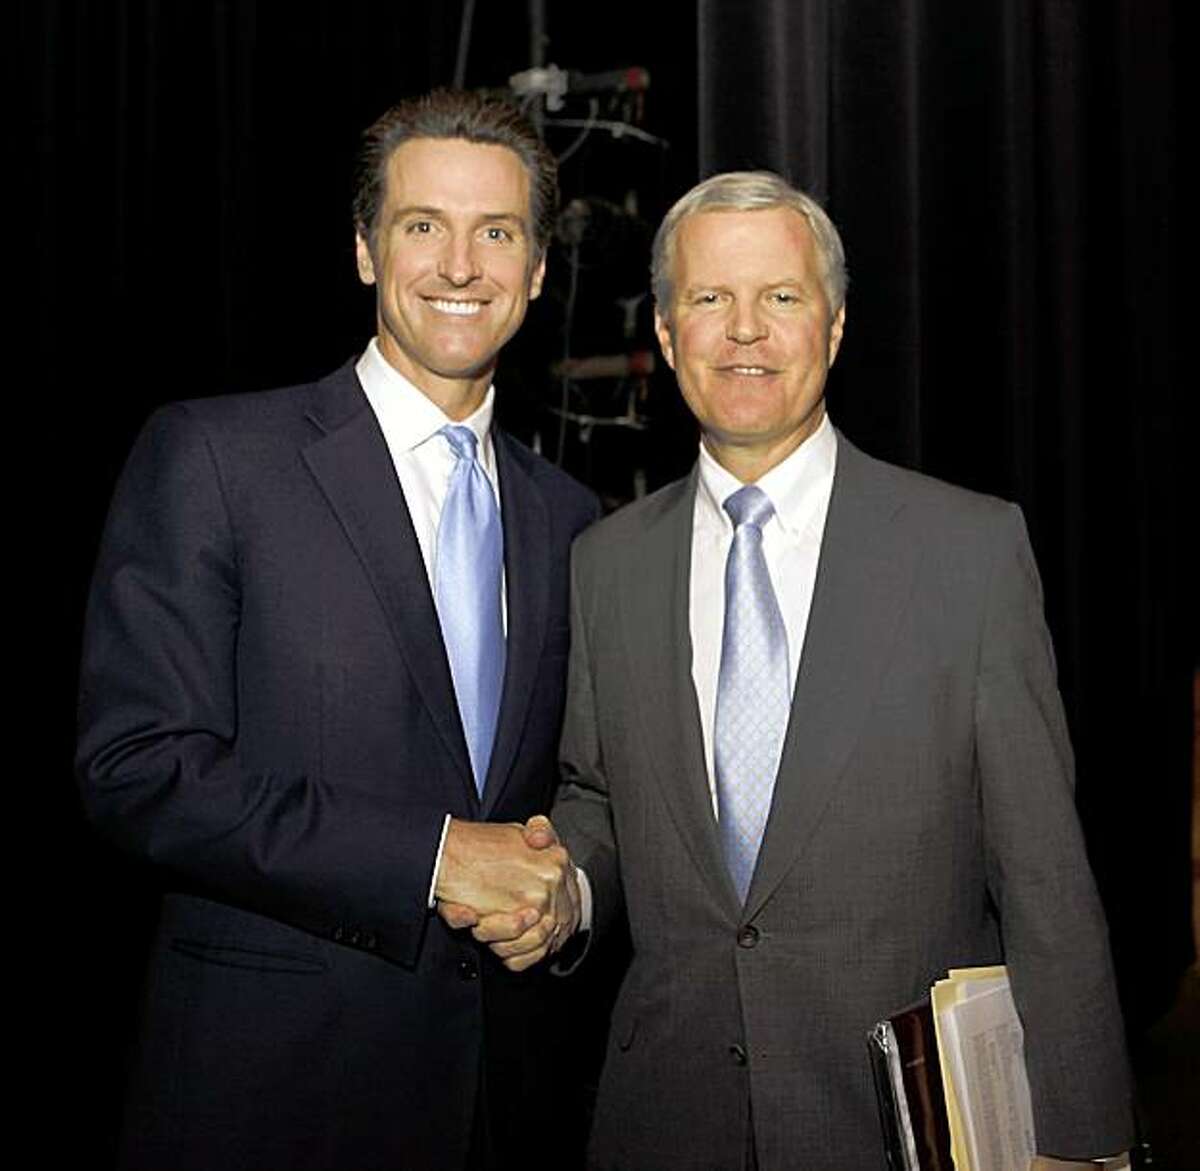 California Finance Director Tom Campbell, right, who is running for Governor, shake hands with San Francisco Mayor Gavin Newsom, left, who is also running for Governor, backstage between panel discussions at Santa Clara University in Santa Clara, Calif., Wednesday, Sept. 16, 2009. (AP Photo/Paul Sakuma)